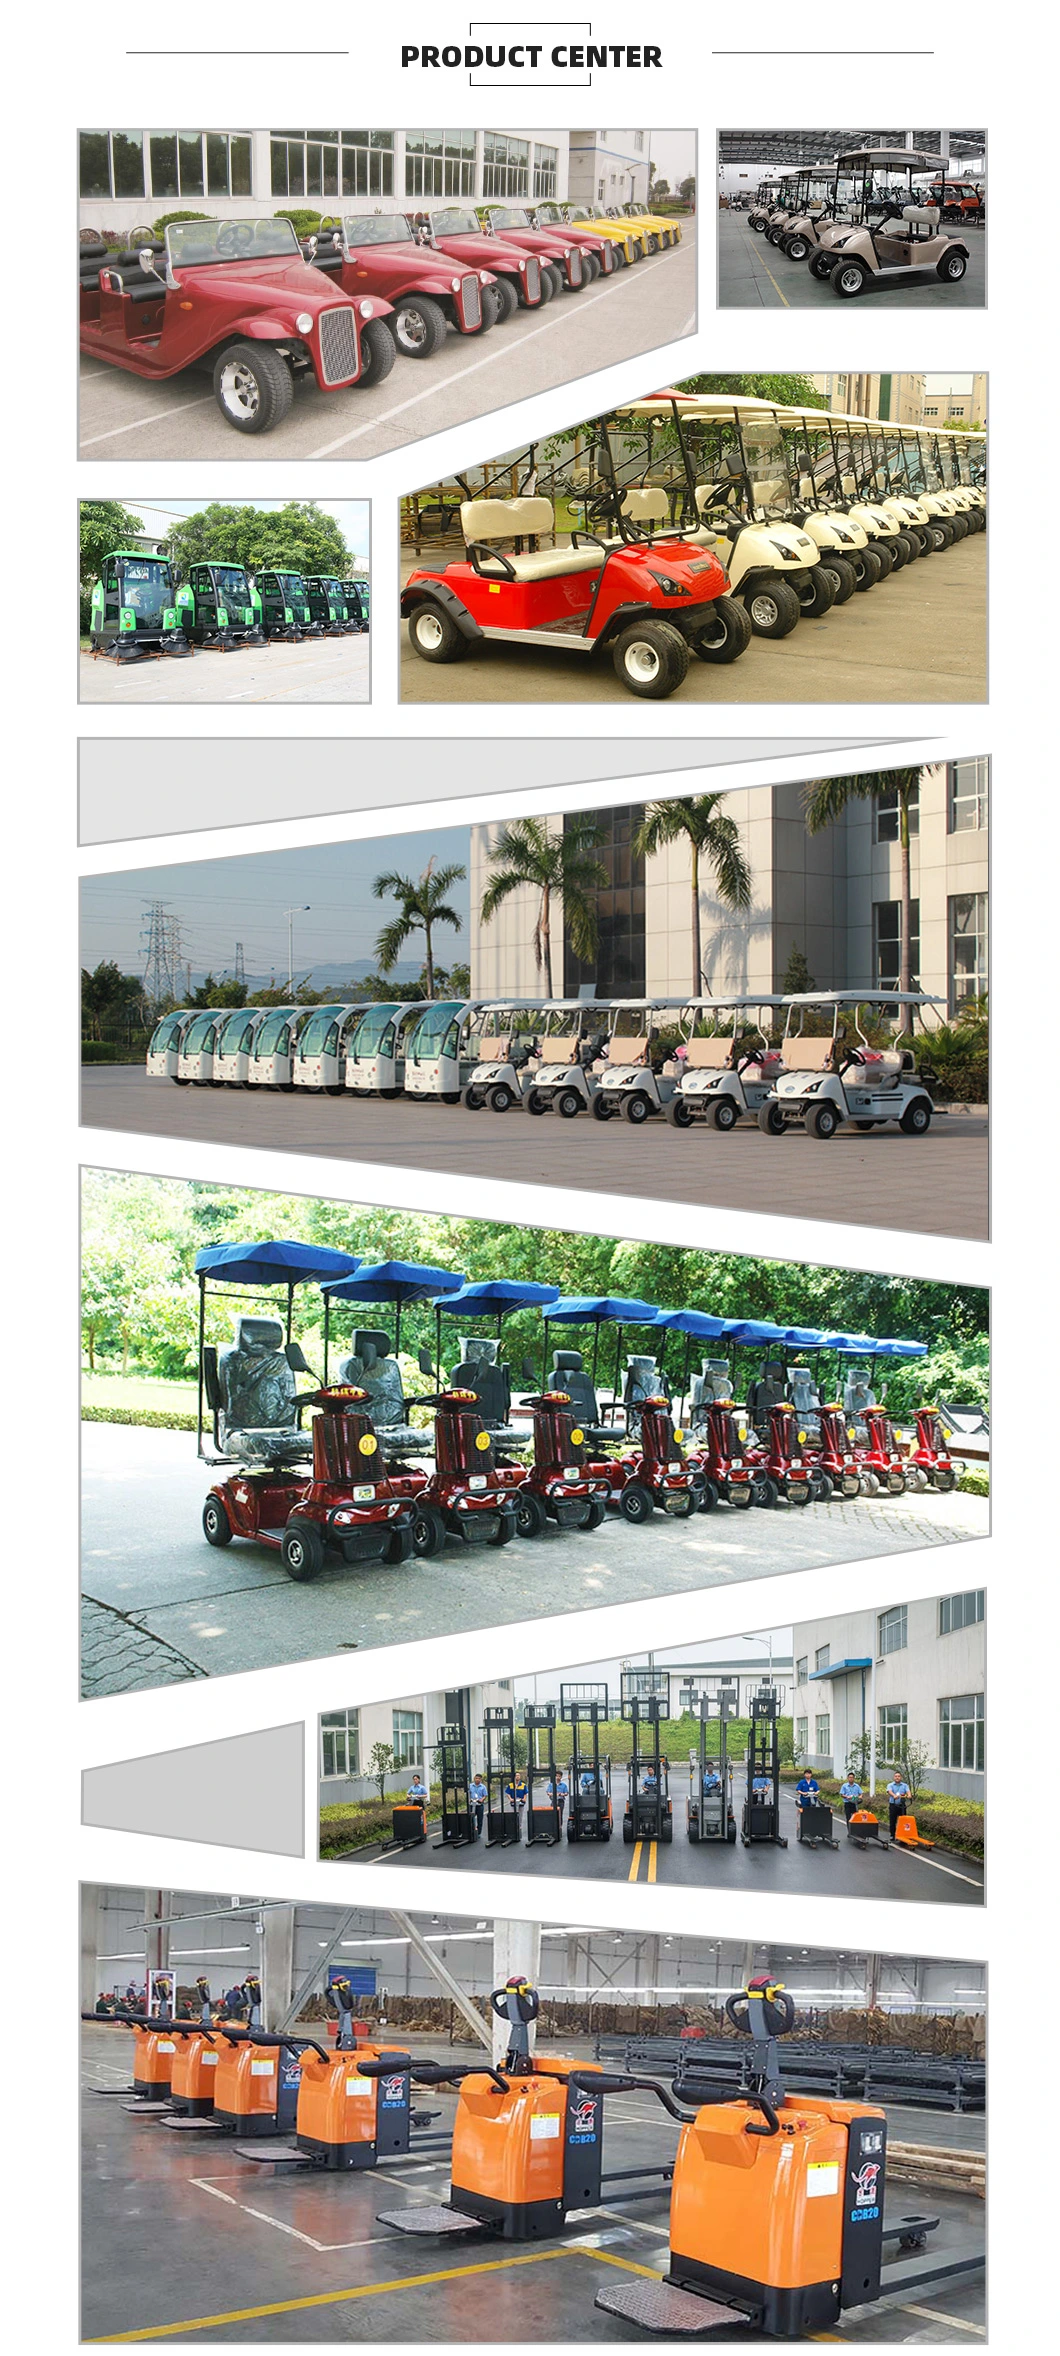 Chinese Walk Behind Sweeper Supermarket Floor Sweeper Cleaning Scrubber Auto Scrubber (DQX5/5A)